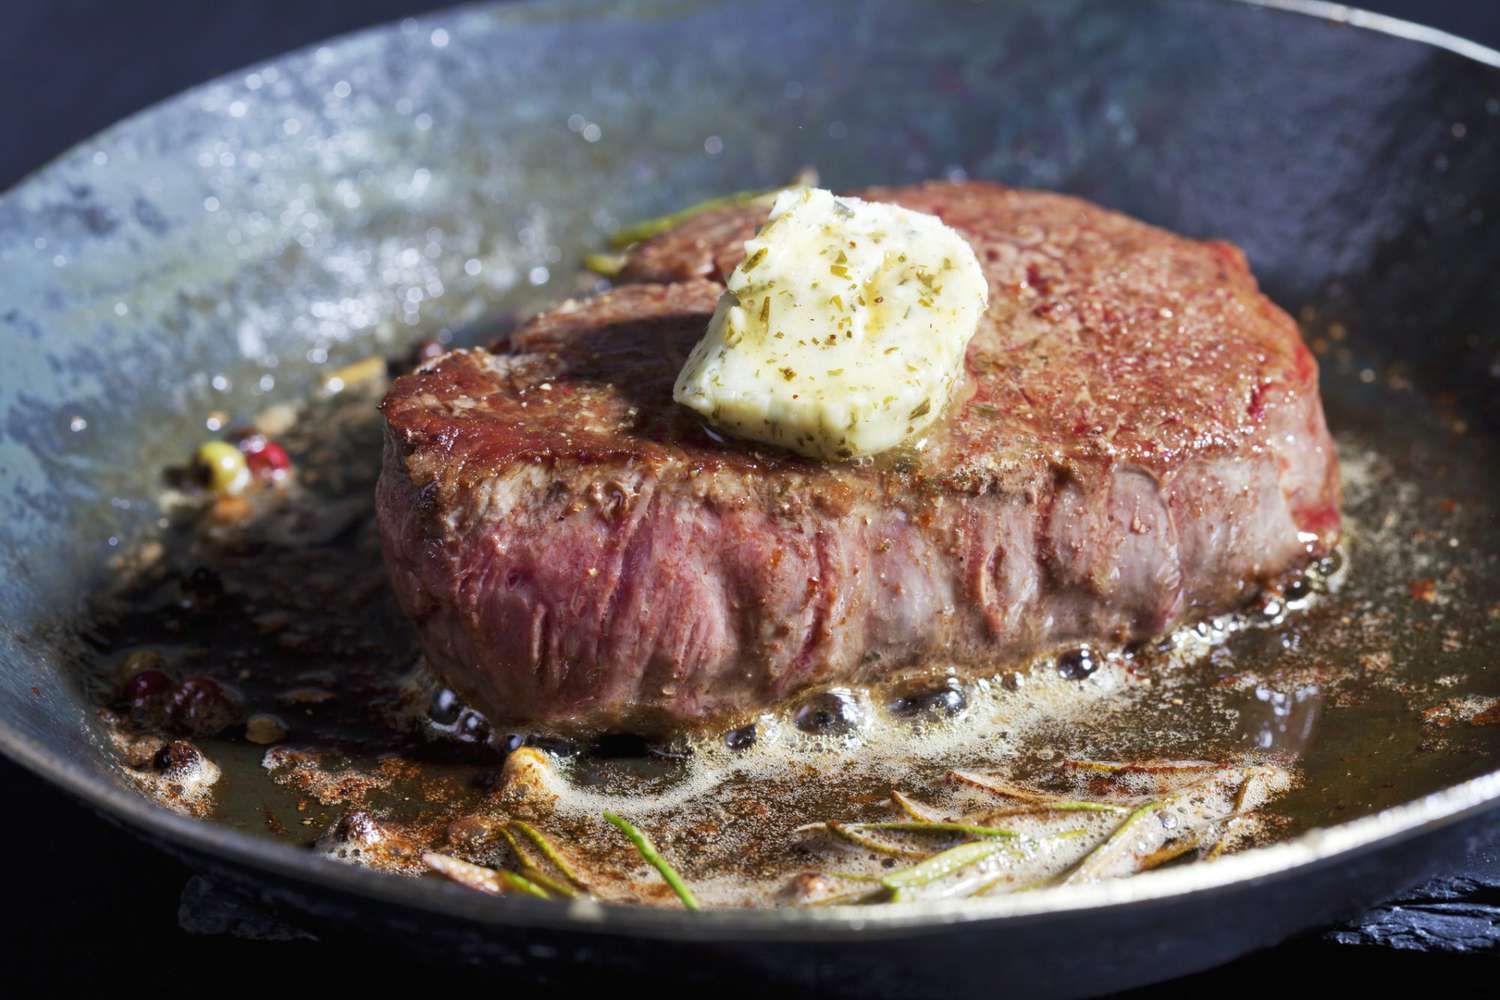 Fried filet of beef with herb butter, peppercorns and rosemary in a pan